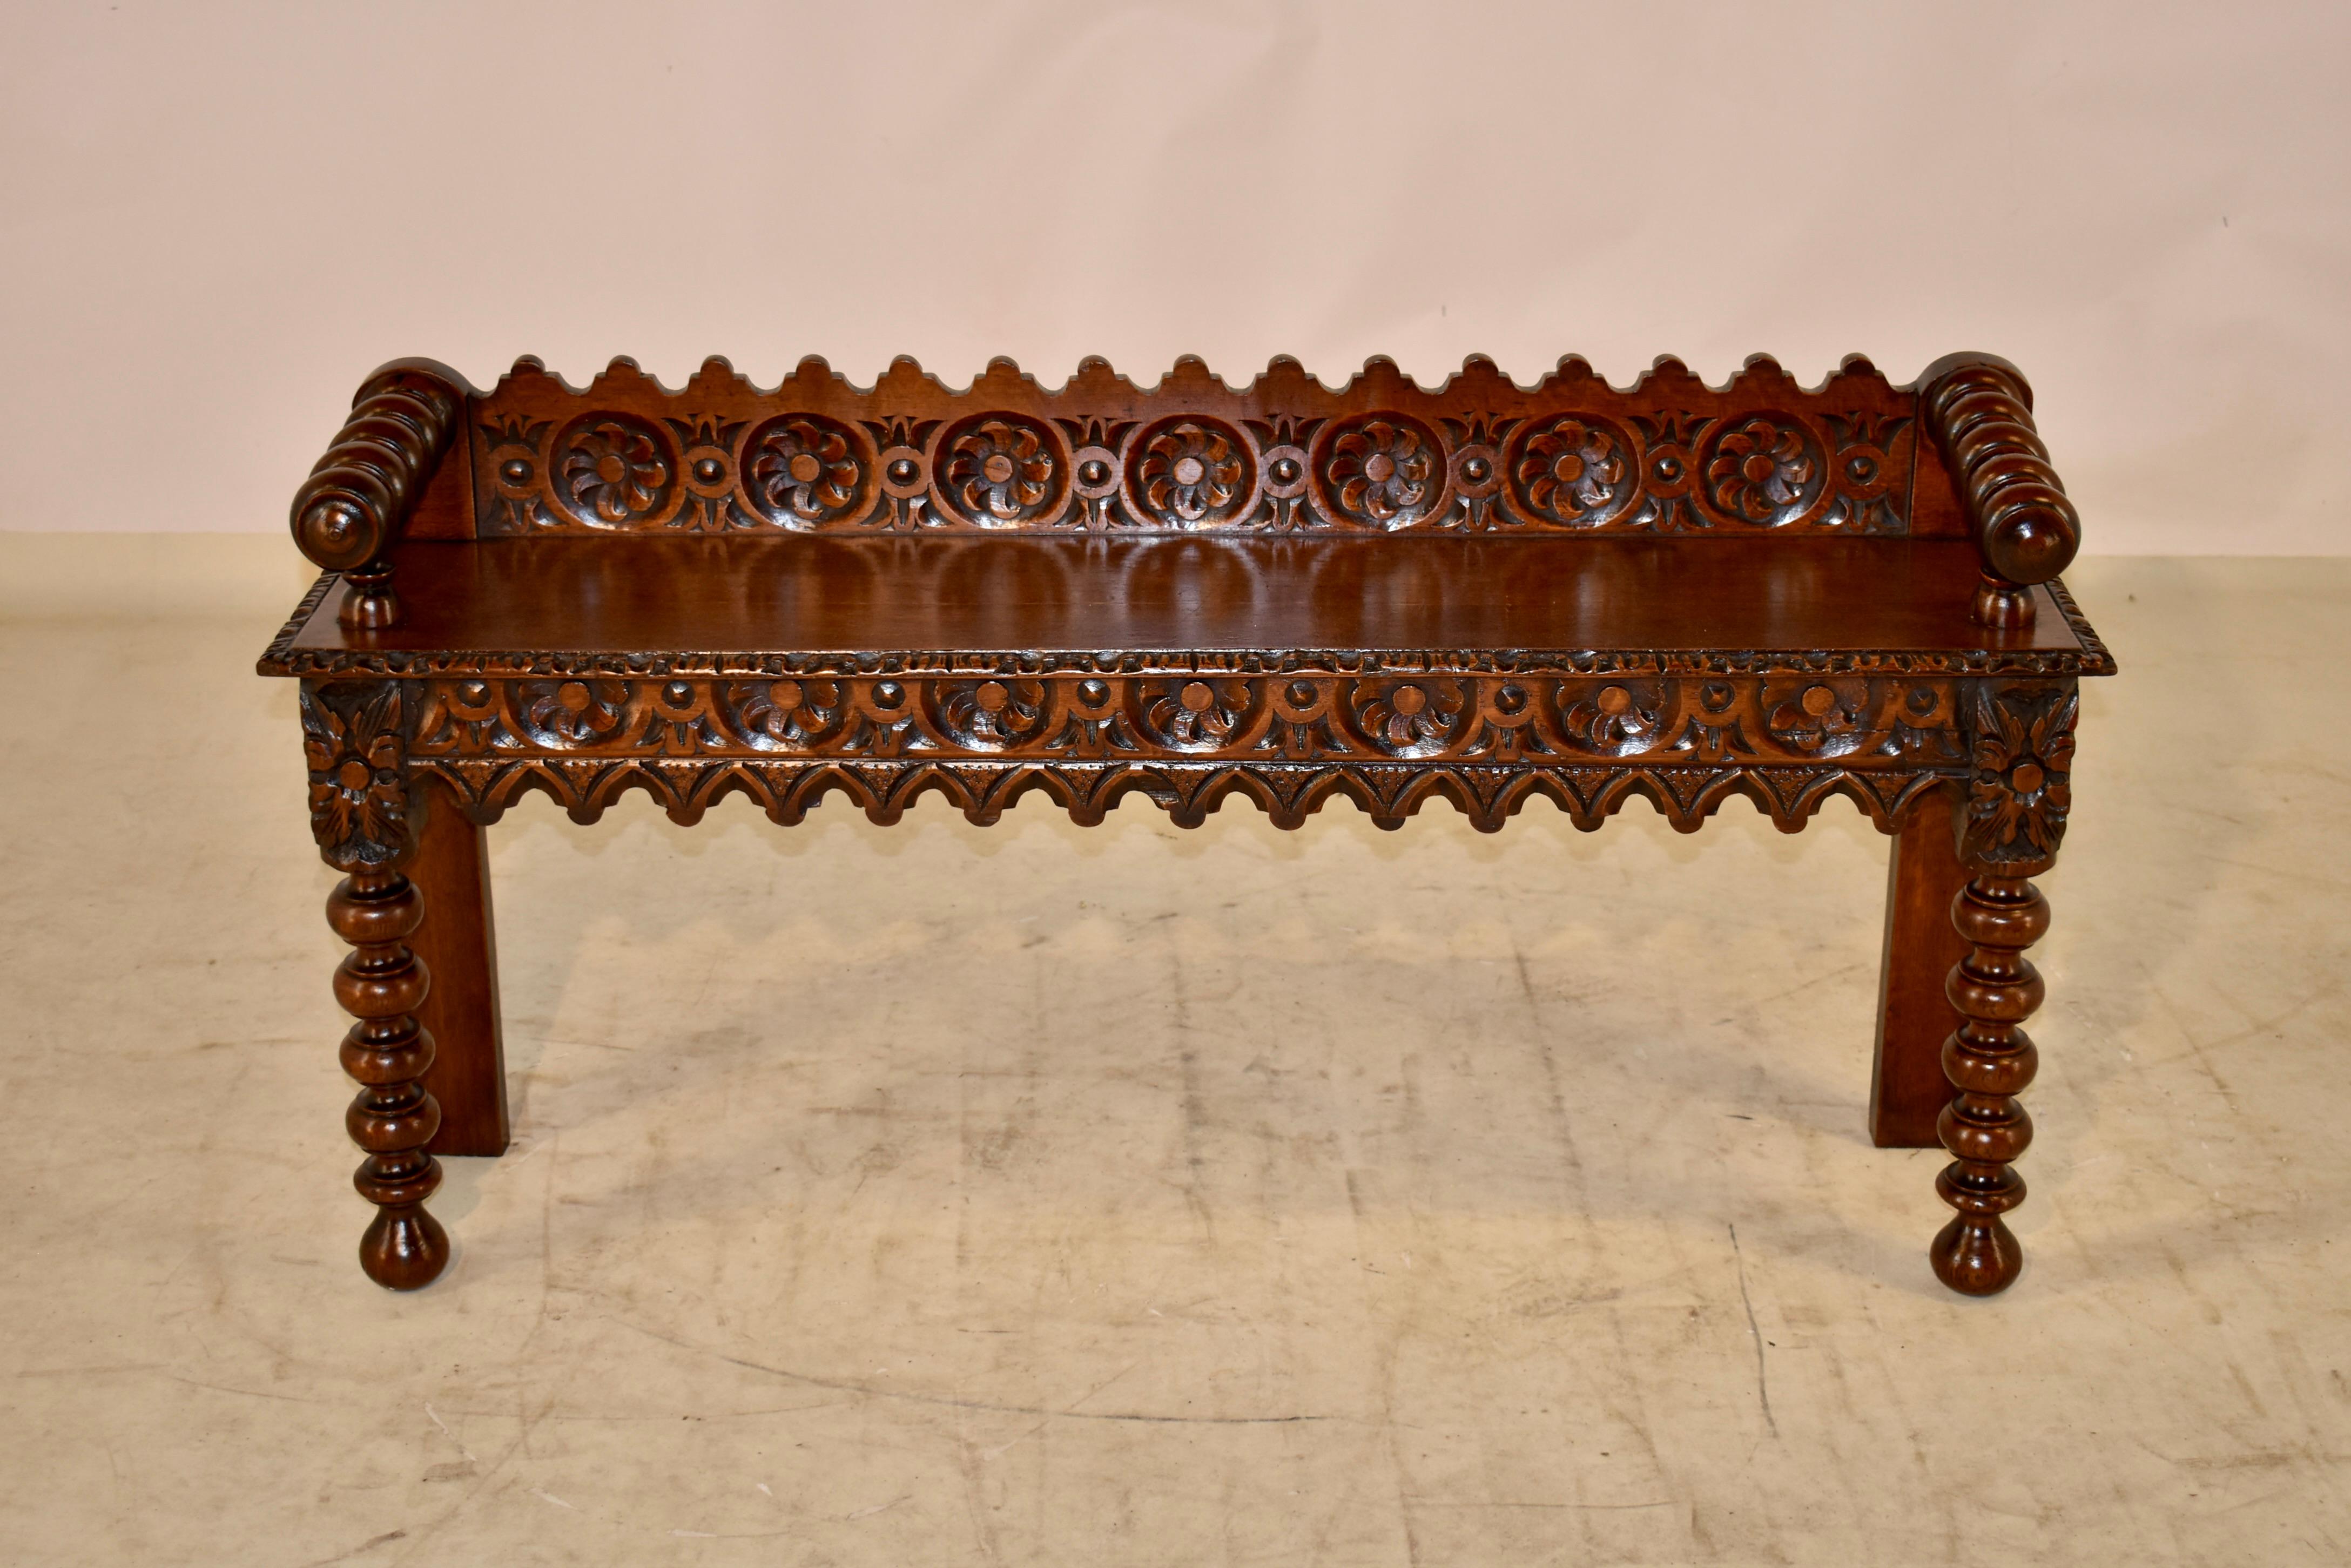 19th century English oak carved window seat with a lovely hand-carved and scalloped back, following down to hand turned arms, which are resting upon the seat.  The arm height is 24 inches.  The seat has a hand carved and beveled edge over a gorgeous